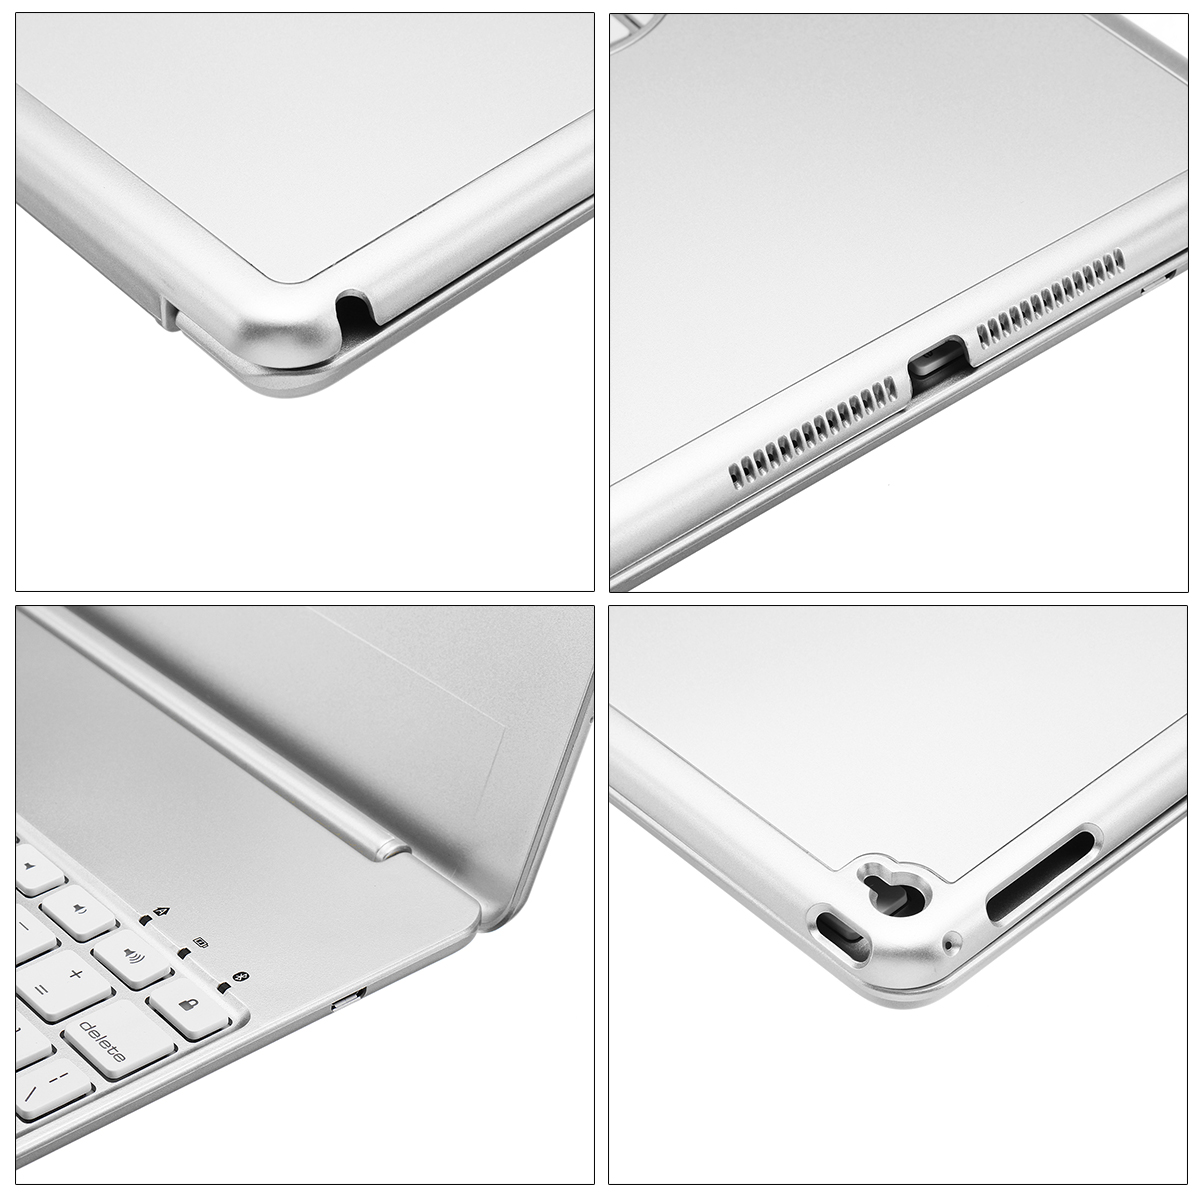 7 Colors Backlit Aluminum Alloy Wireless bluetooth Keyboard Case For iPad Air/iPad Air 2 16